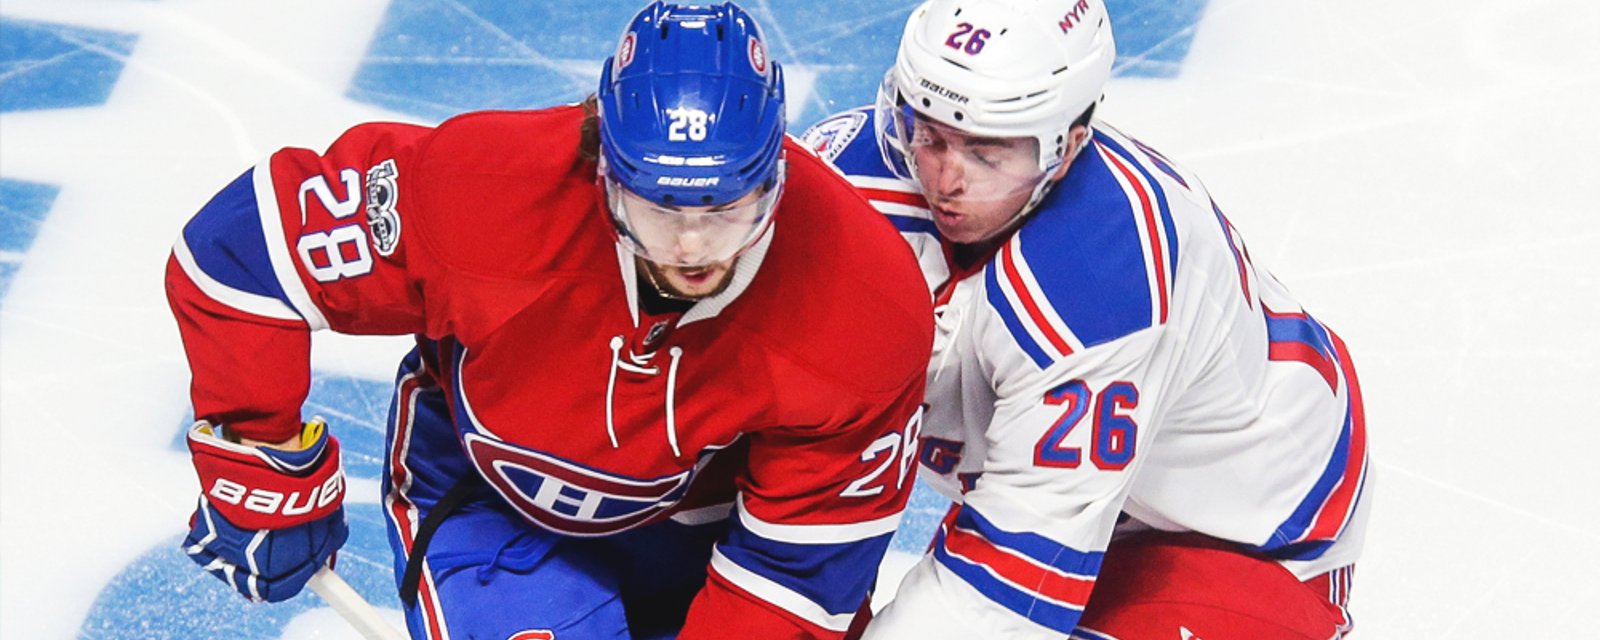 Breaking: The Montreal Canadiens have traded a former 1st round pick.